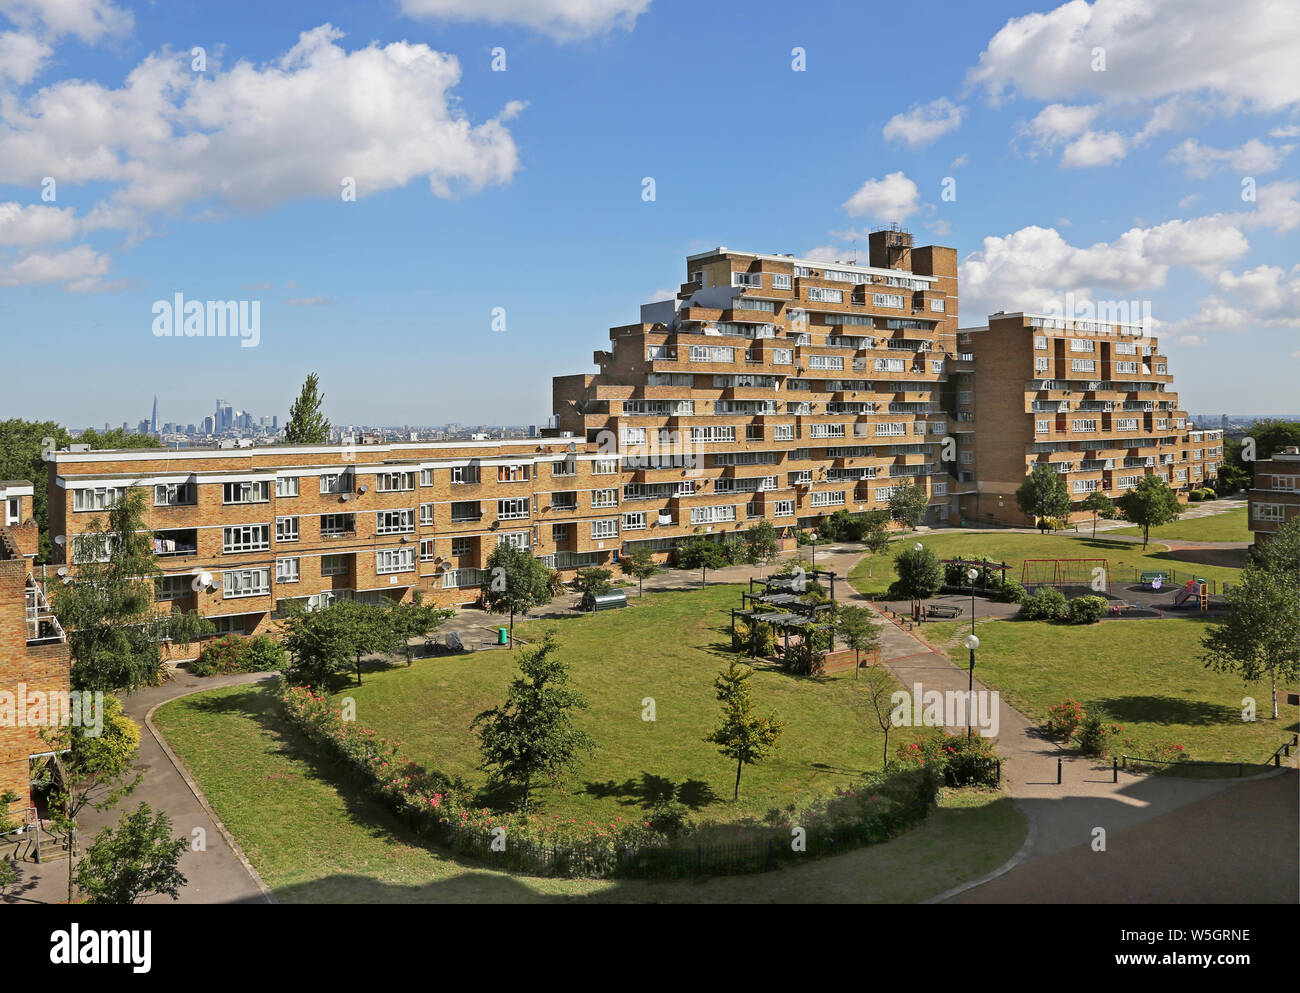 Dawson's Heights, the famous 1960s public housing project in South London, designed by Kate Macintosh. Ladlands block viewed from the south. Stock Photo